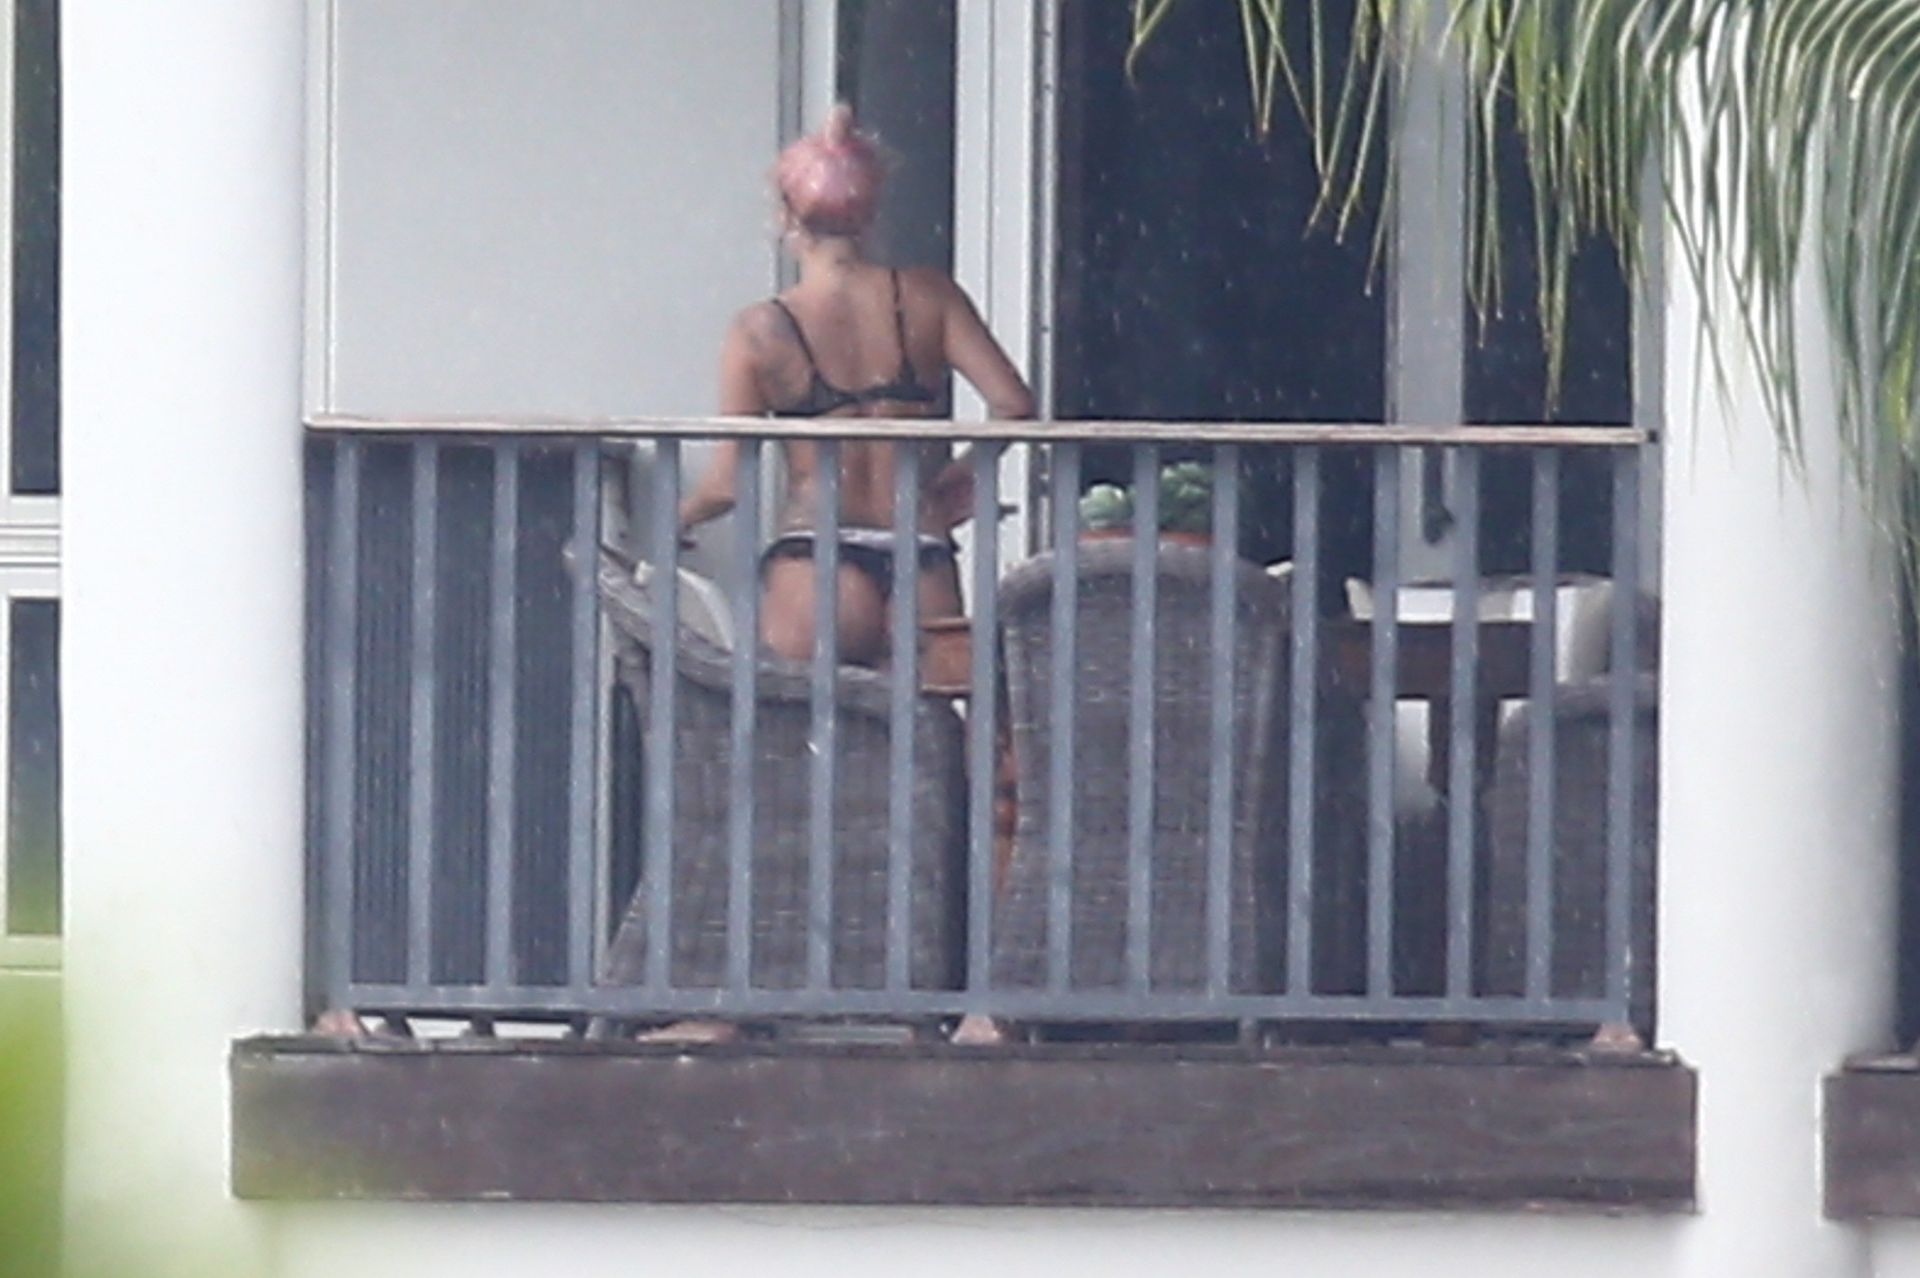 Lady Gaga Enjoys the Views from her Miami Balcony in her Underwear (16 Phot...